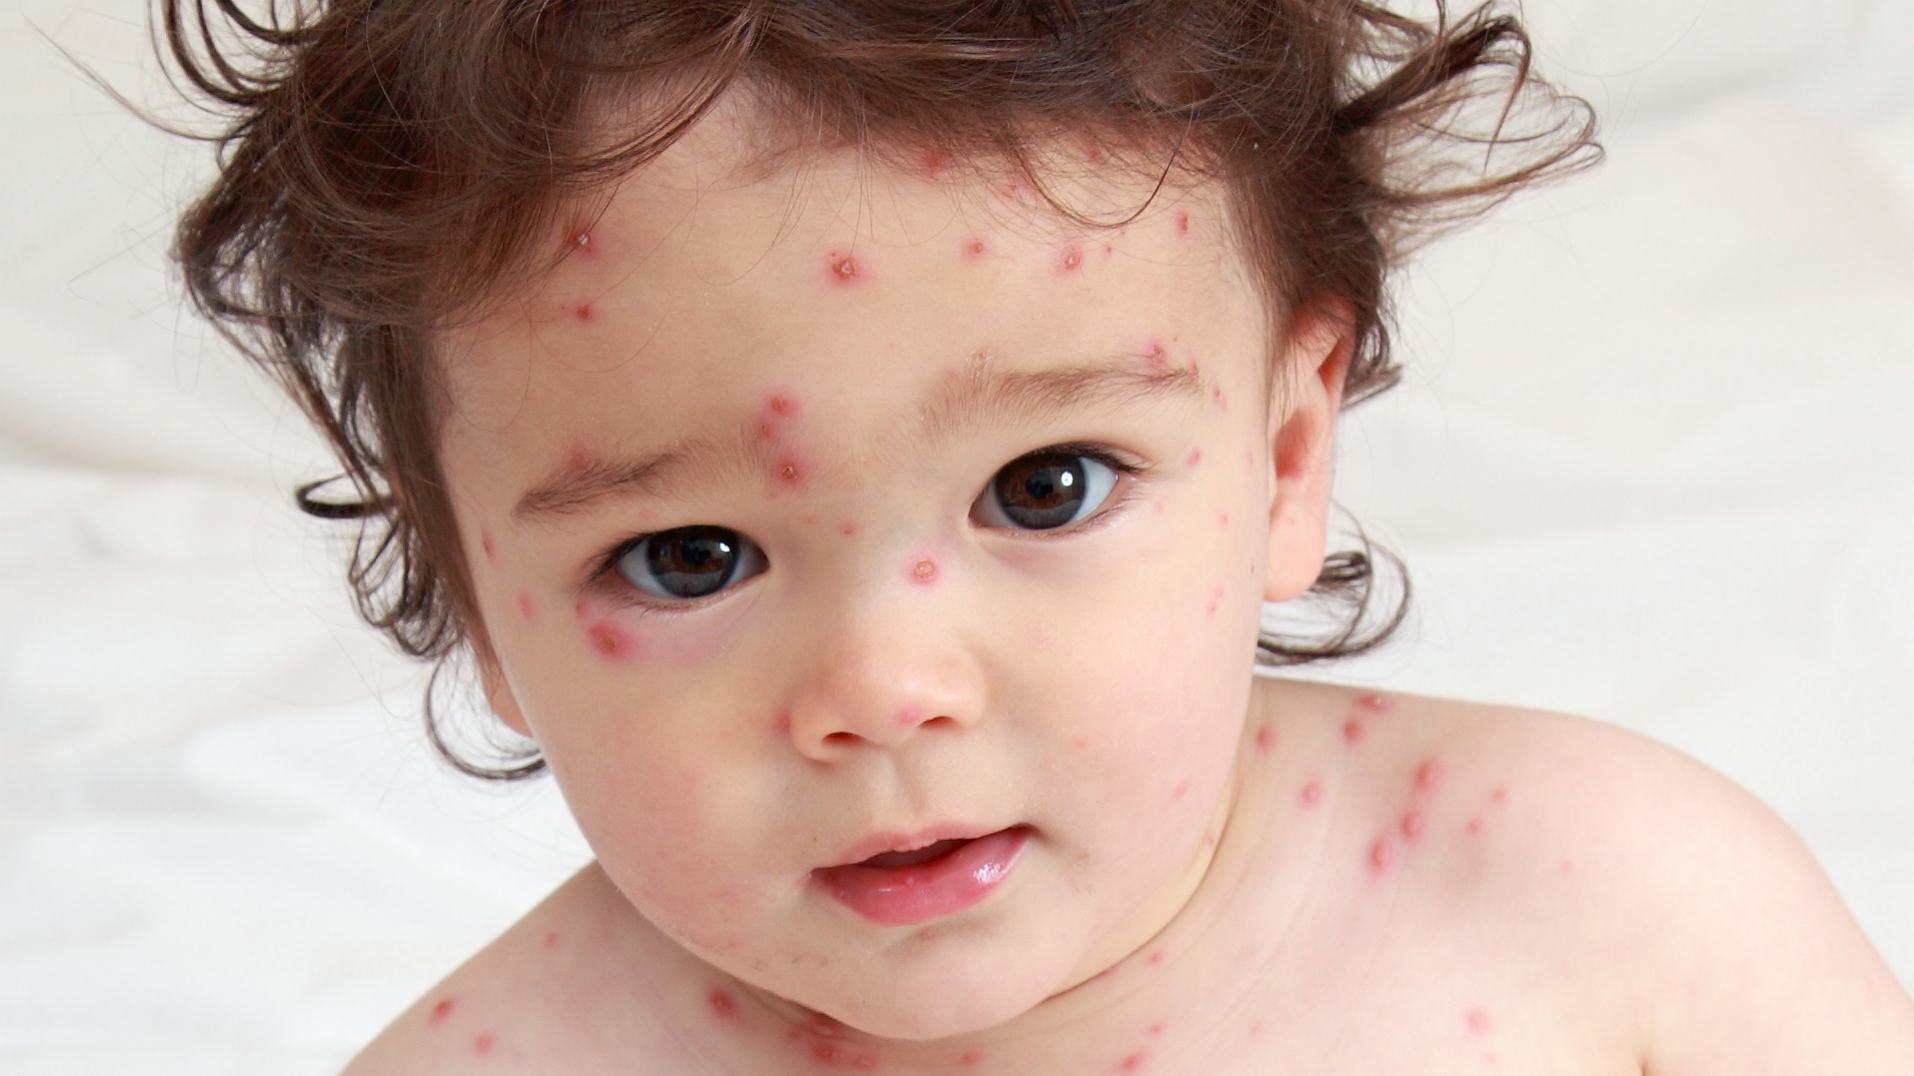 a young child, toddler, with a chicken pox rash on face and torso